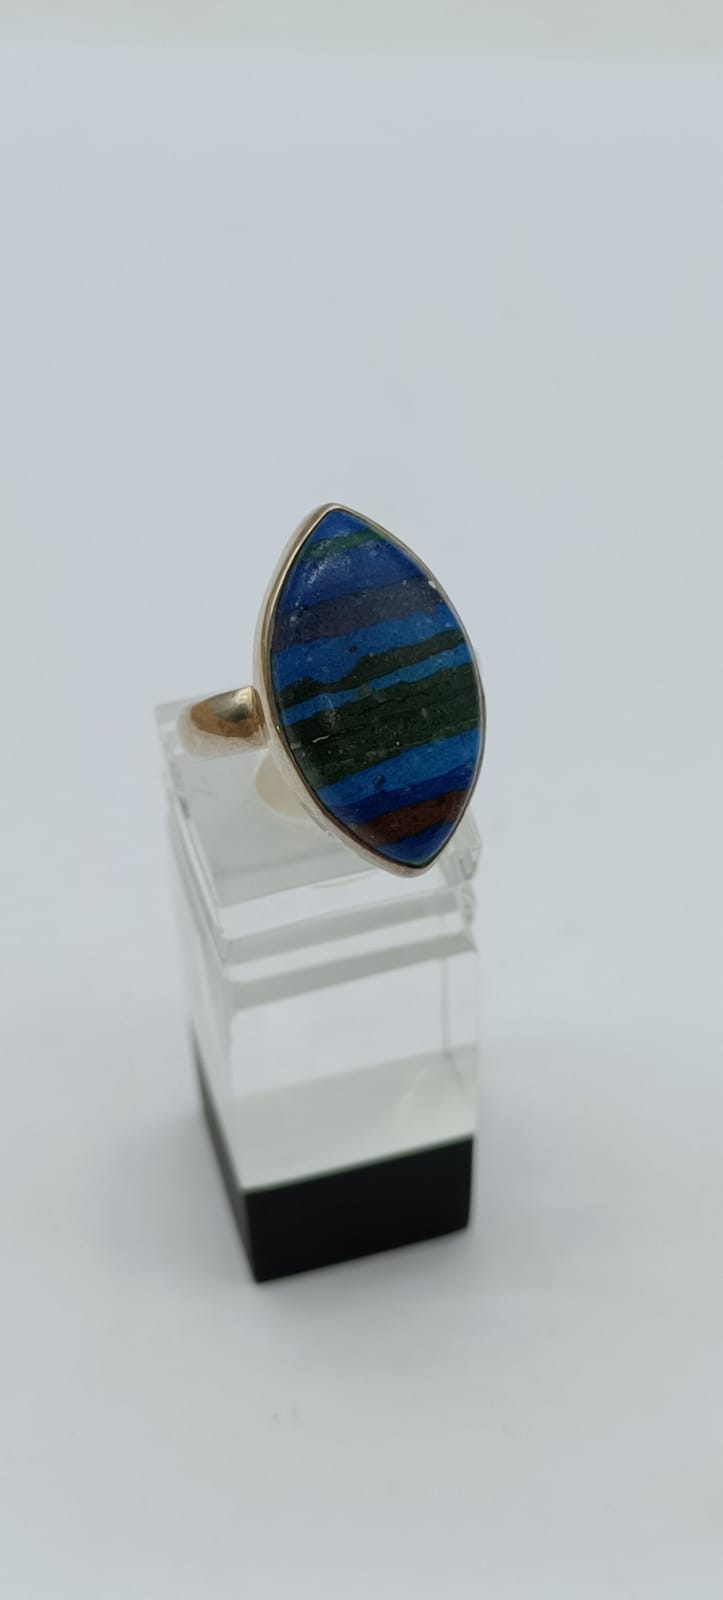 Rainbow Calsilica 925 Sterling Silver Ring Size 7